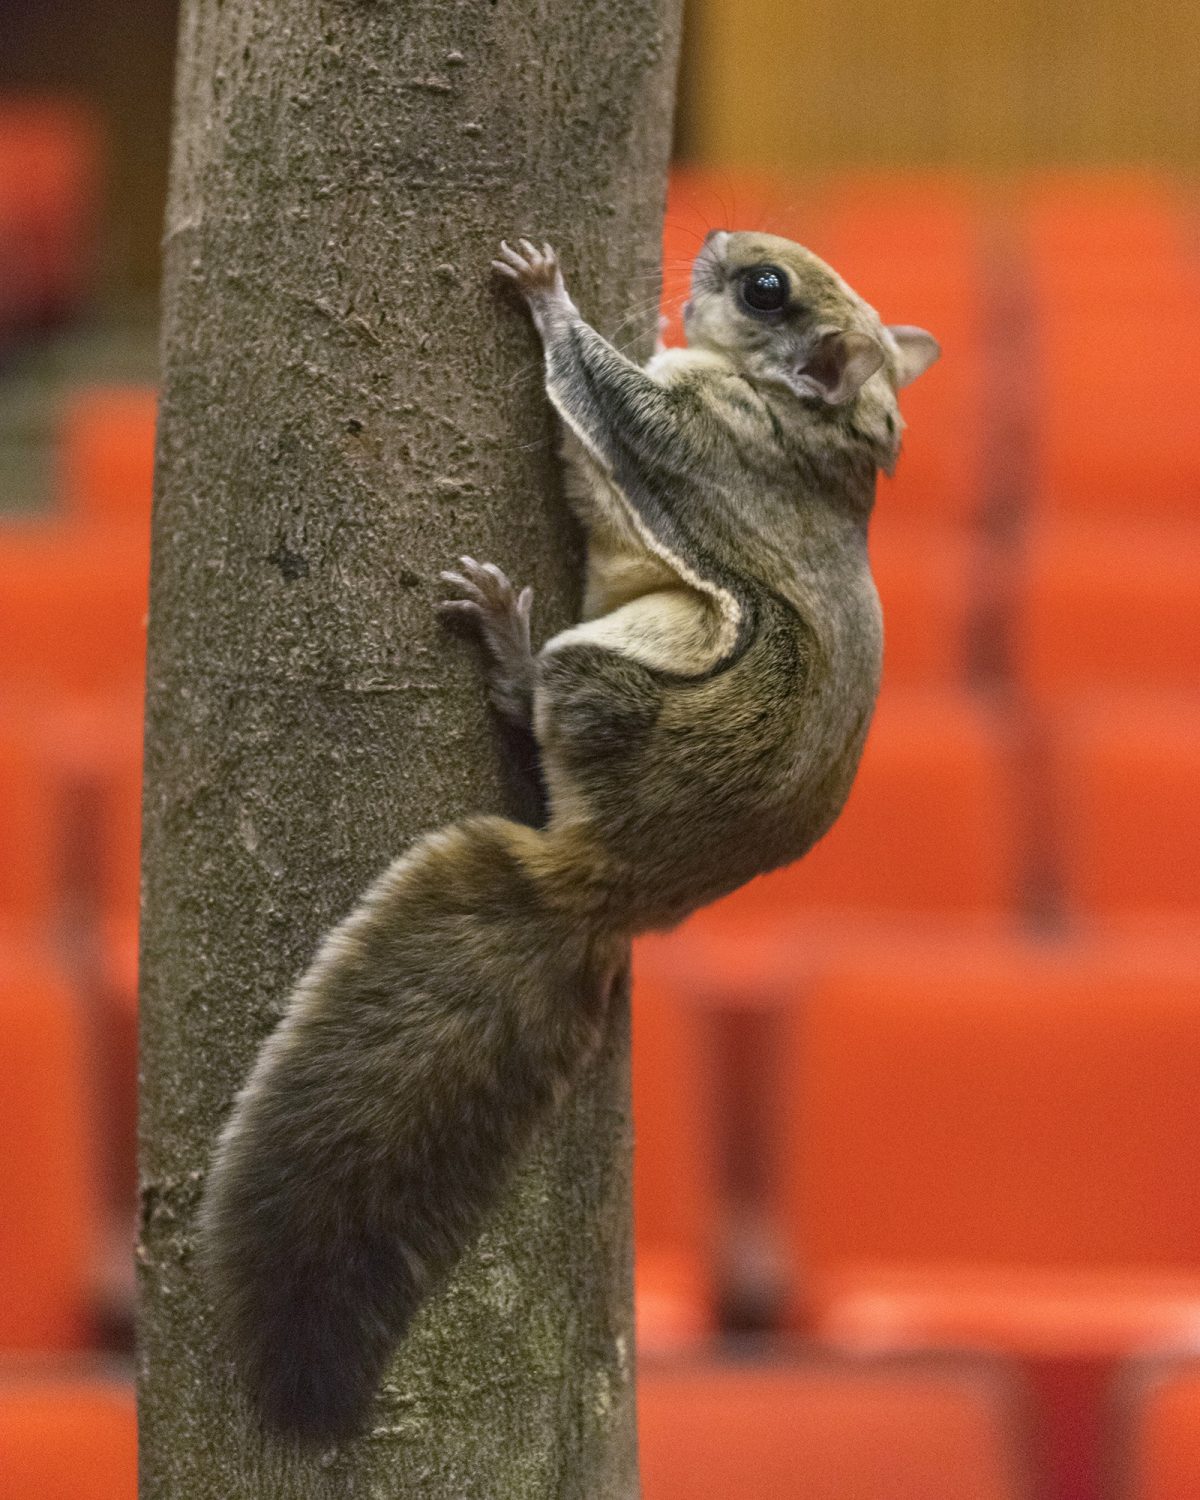 A Southern Flying Squirrel.